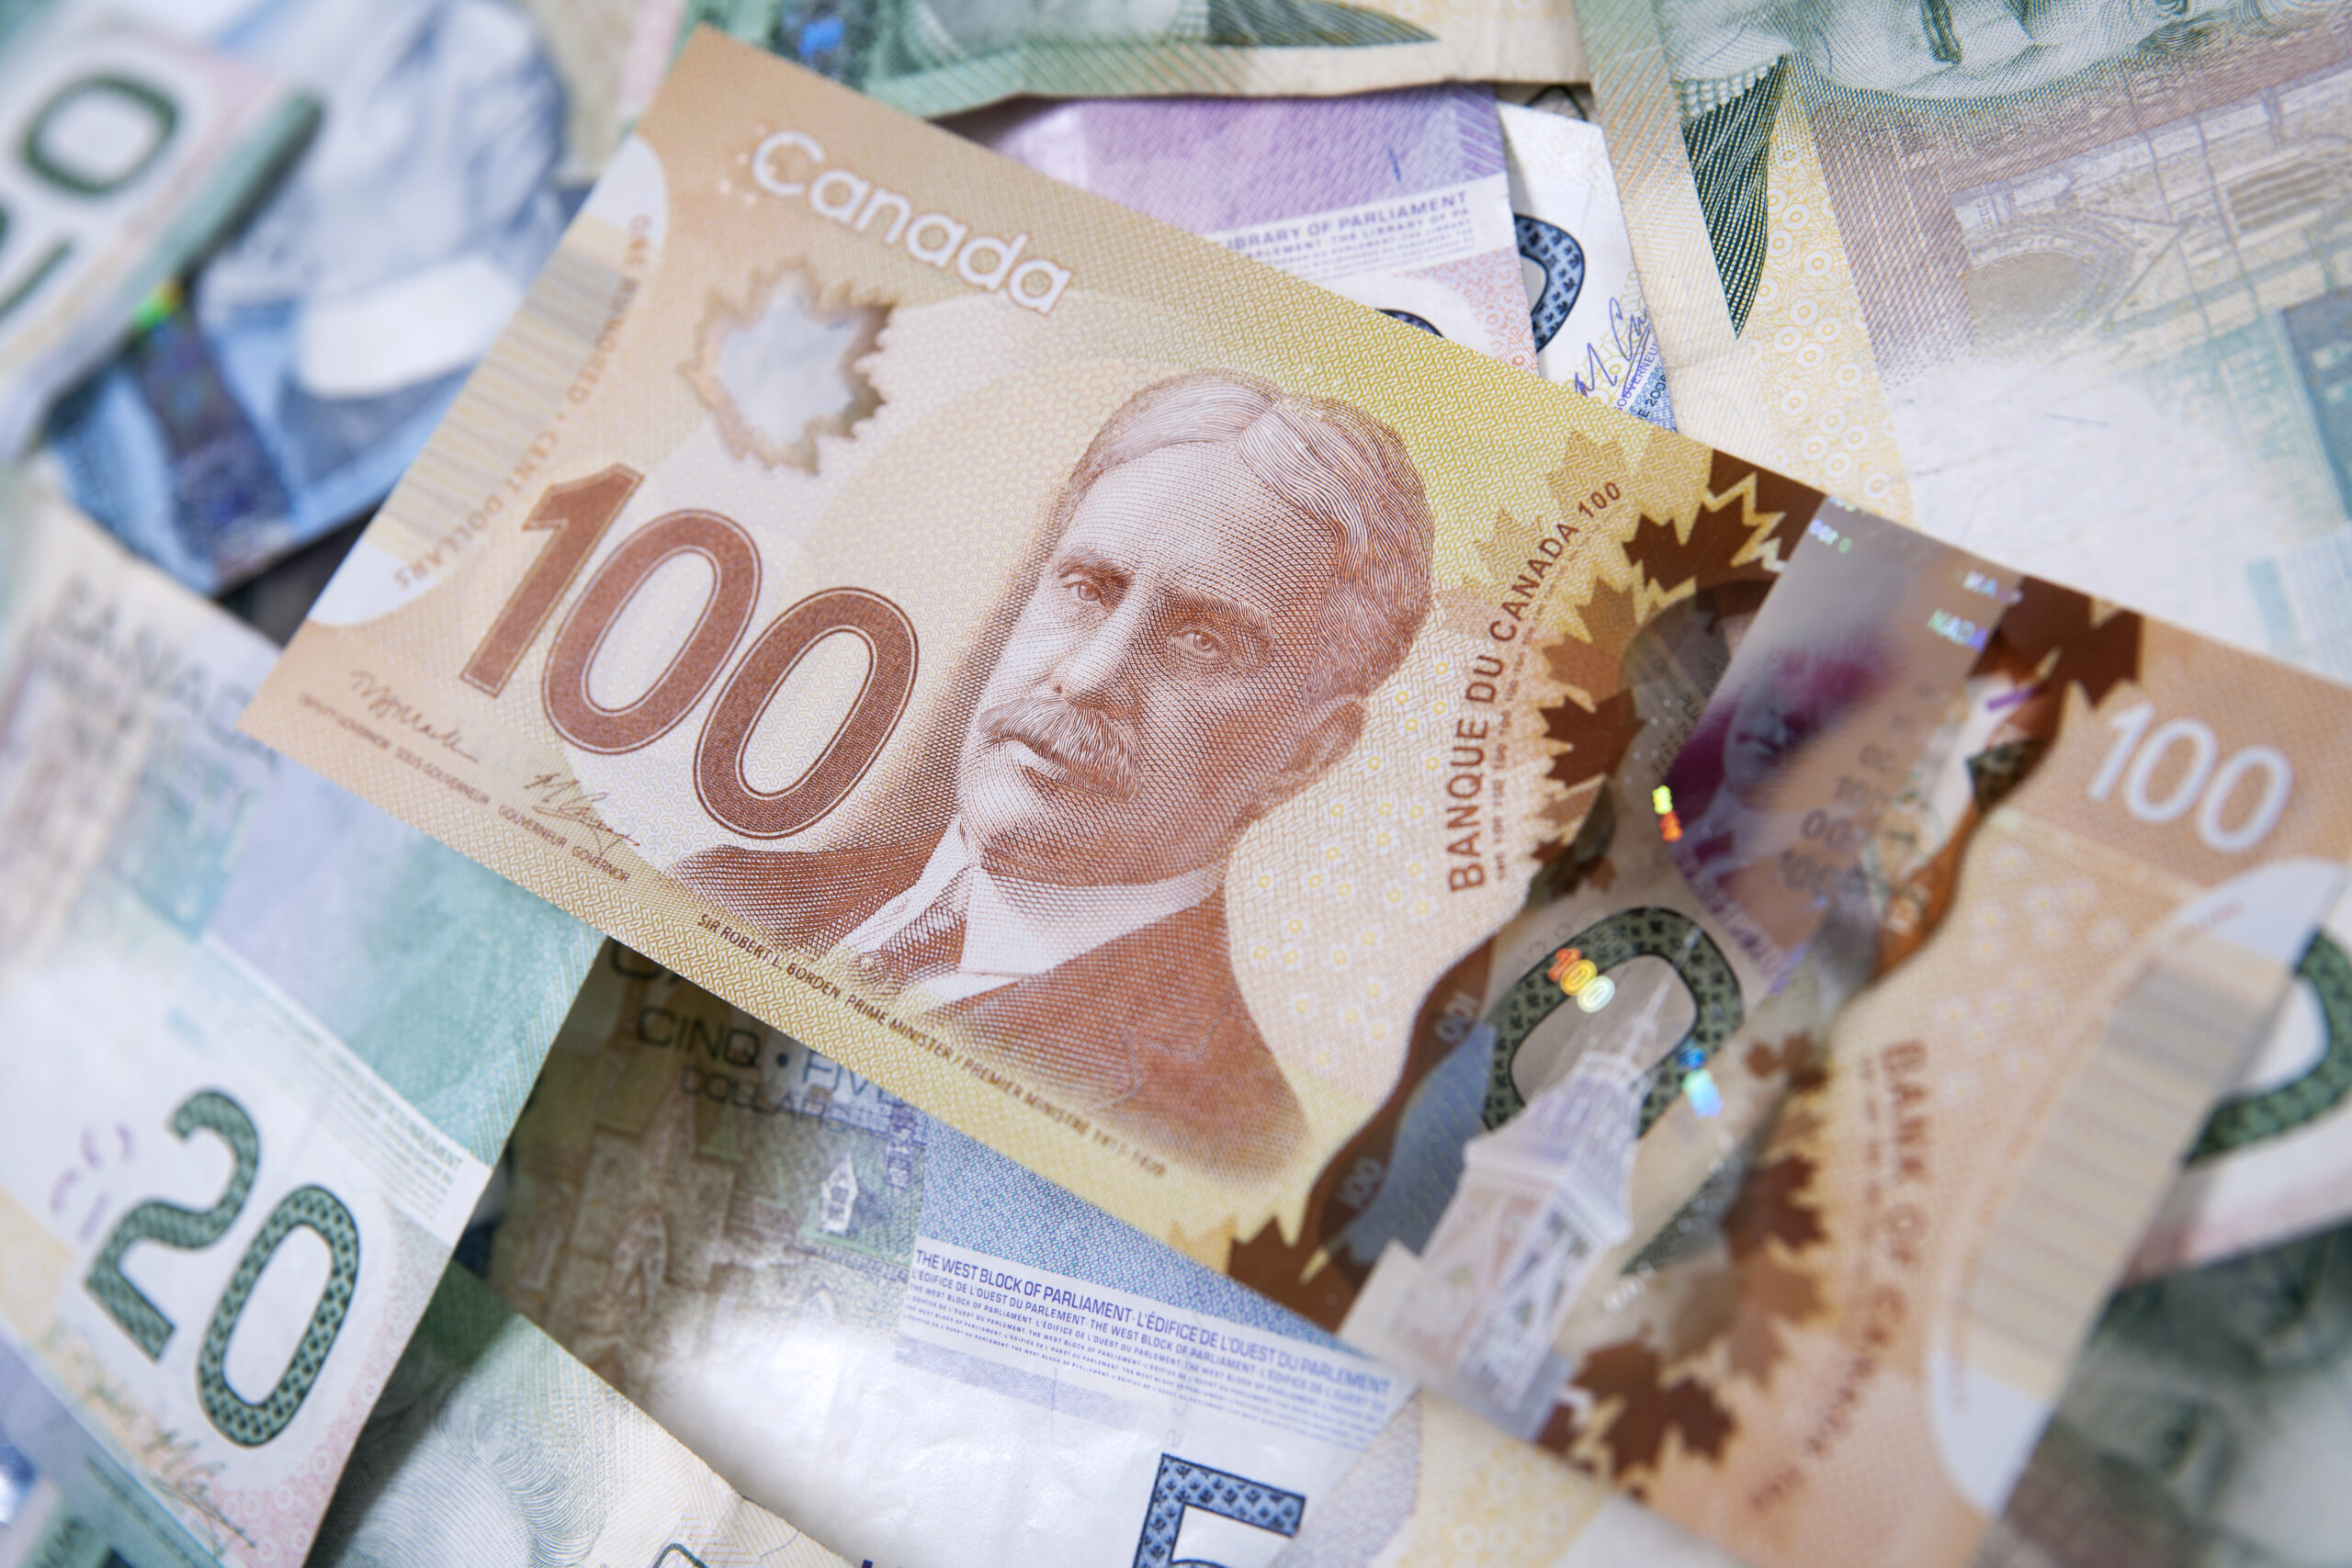 Canadians are split on the impact of the capital gains tax increase. (Bloomberg/Nanos)